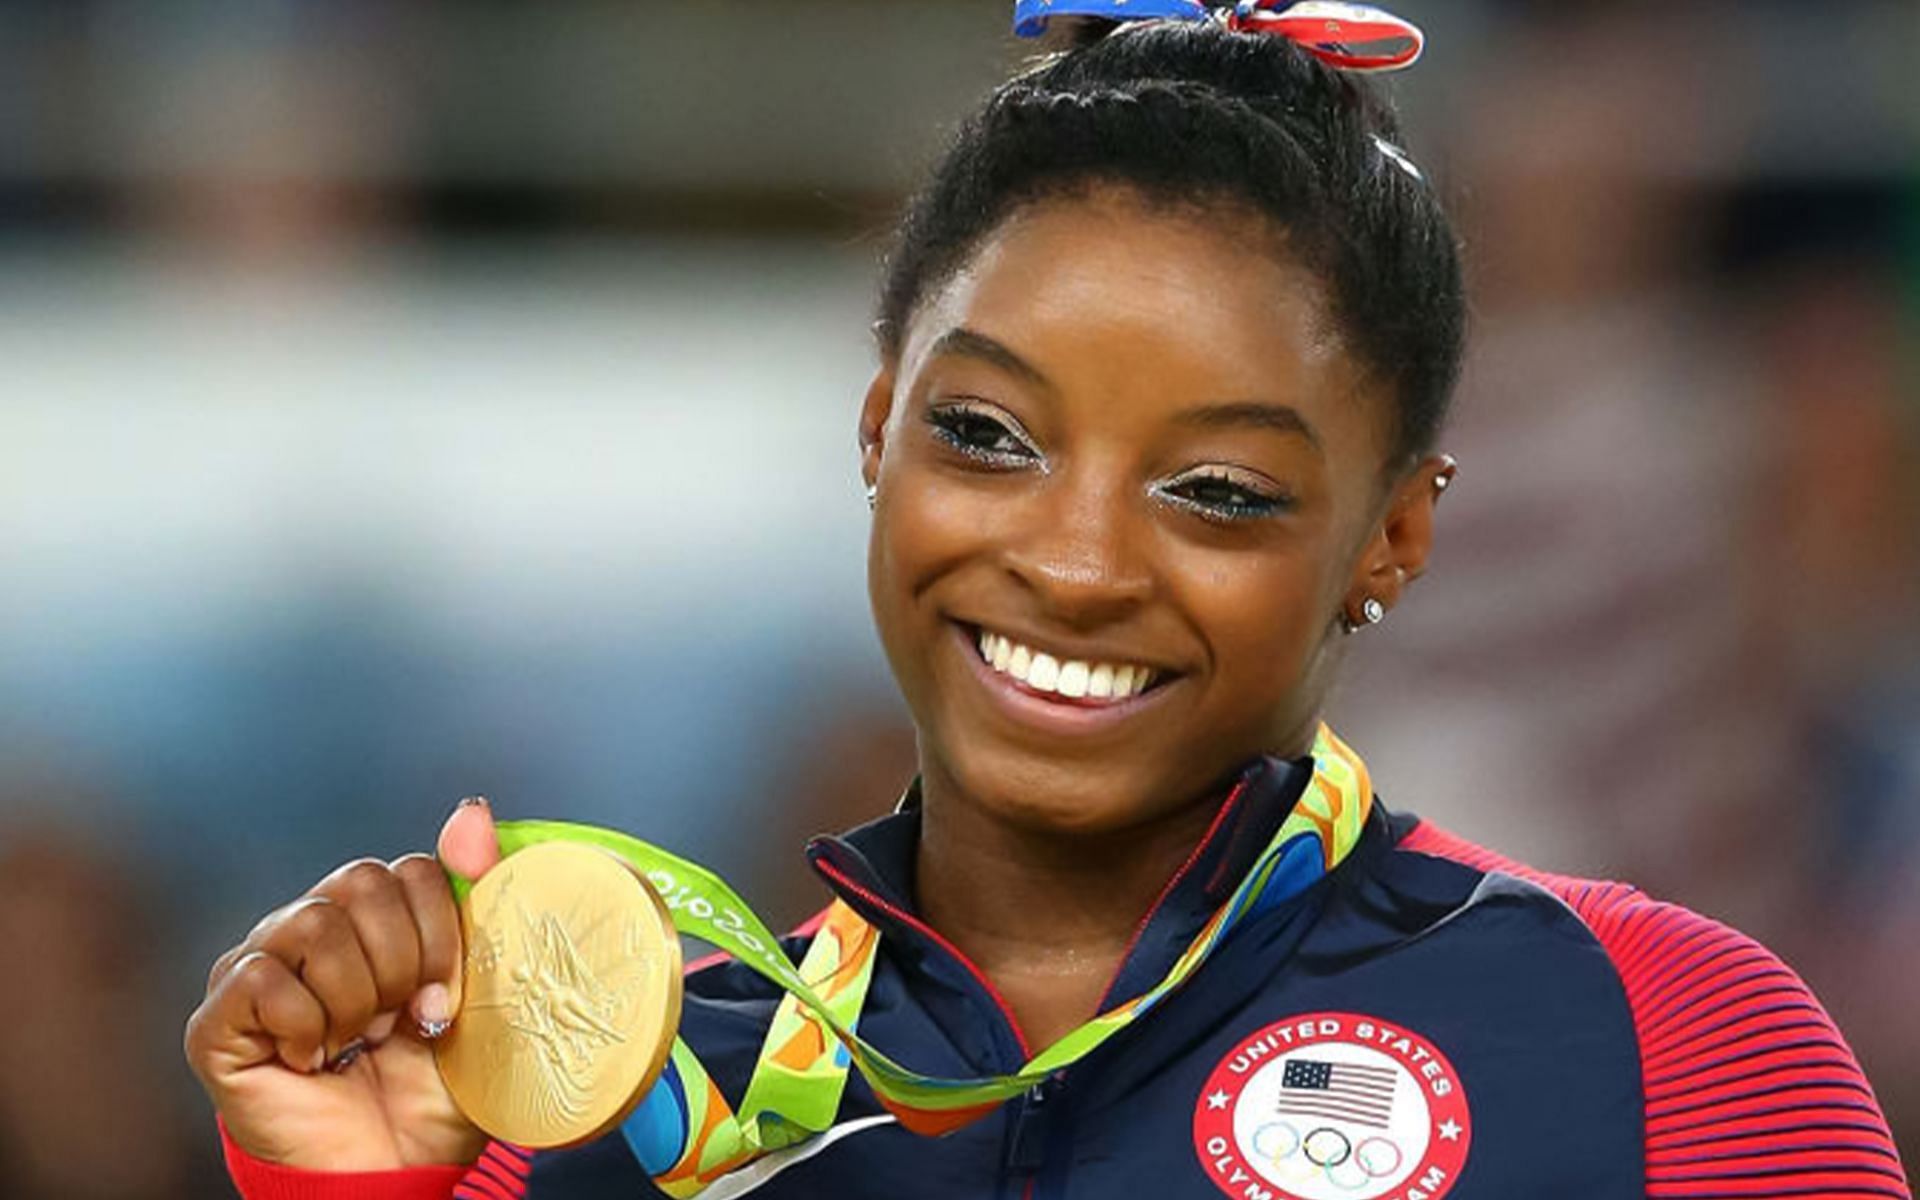 Simone Biles with one of her gold medals at the 2016 Summer Olympics in Tokyo (Image via Getty Images)